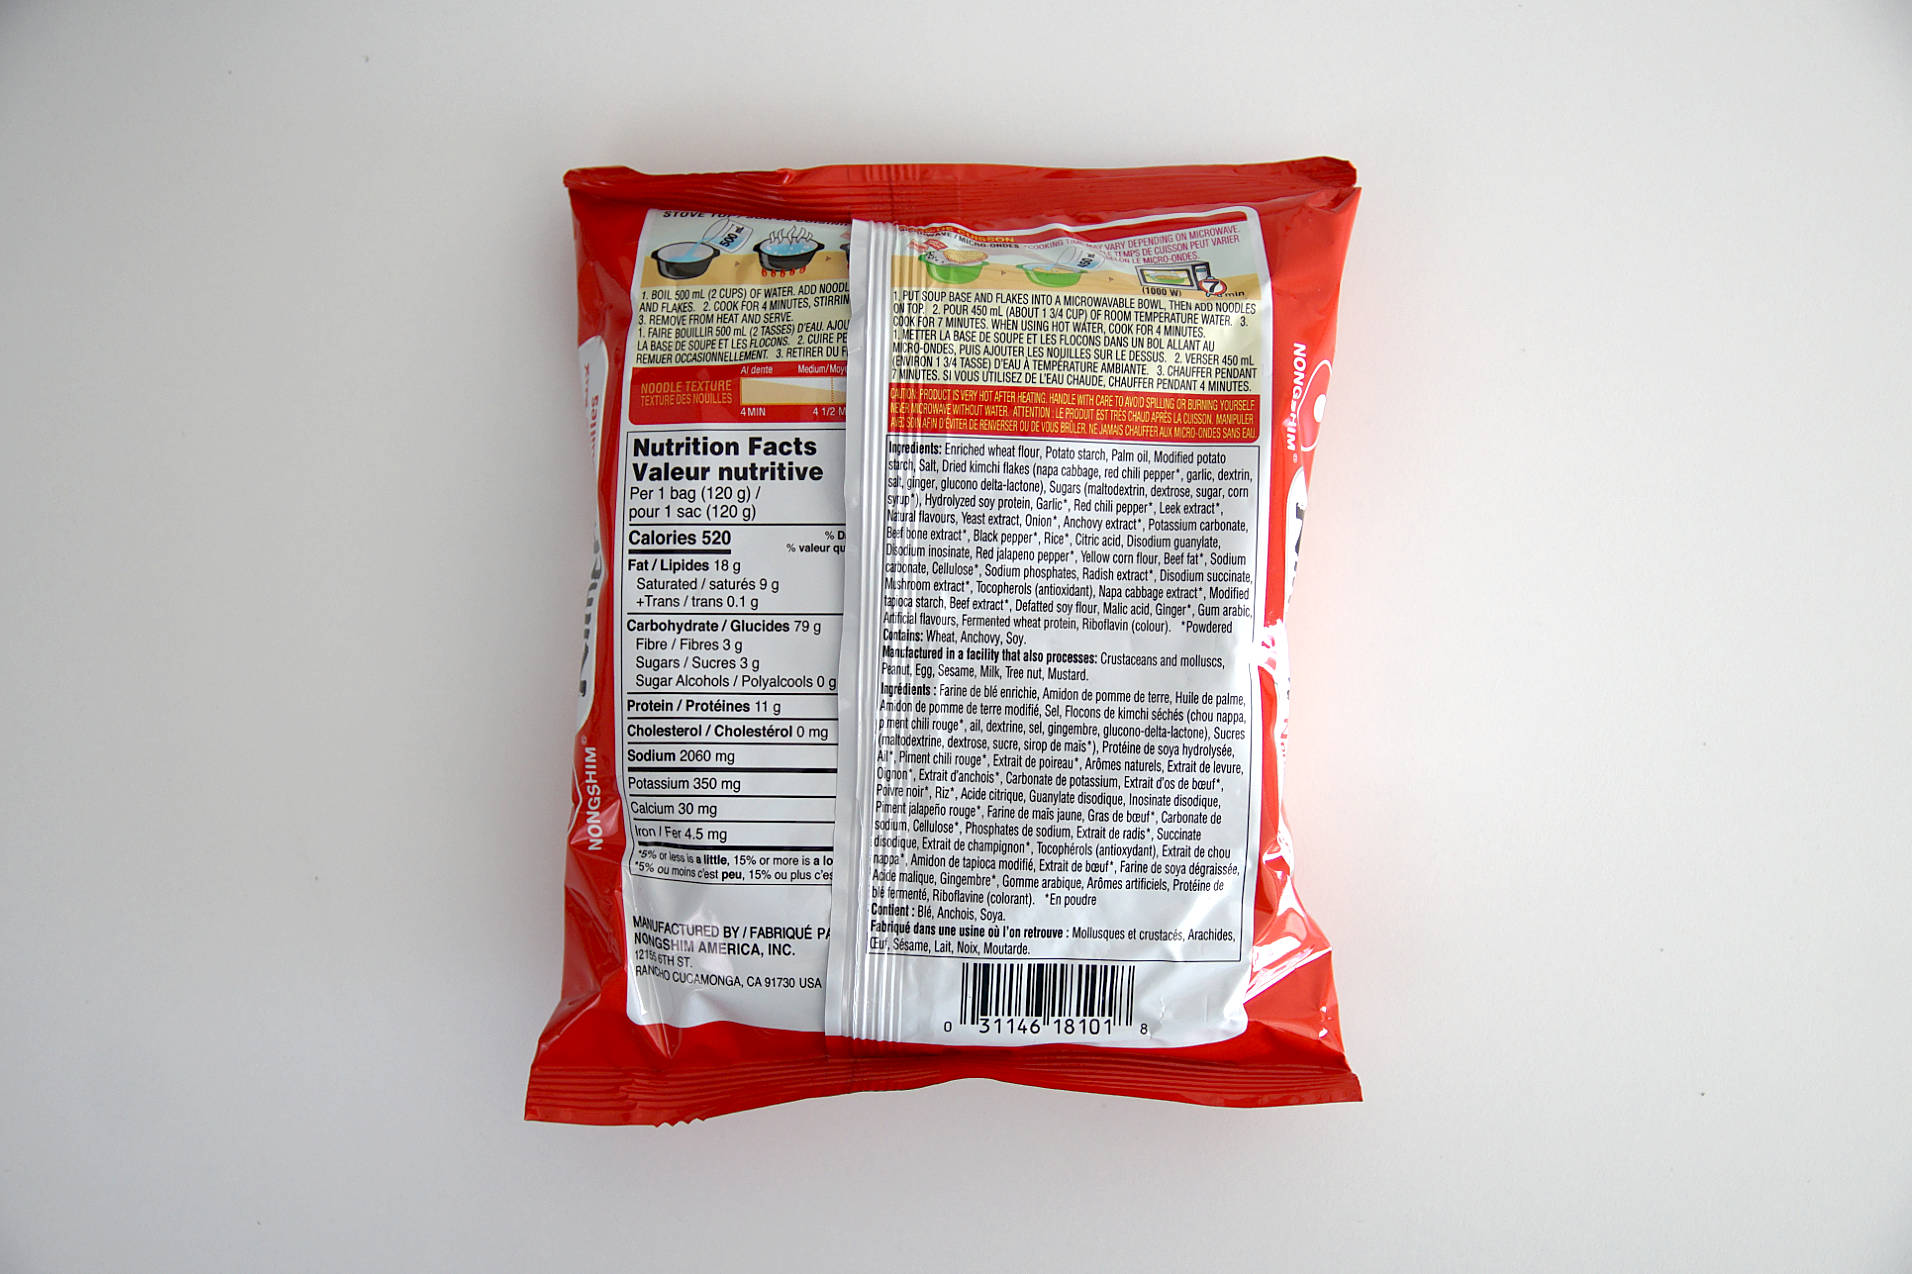 The nutritional facts of Kimchi Noodle Soup by Nongshim